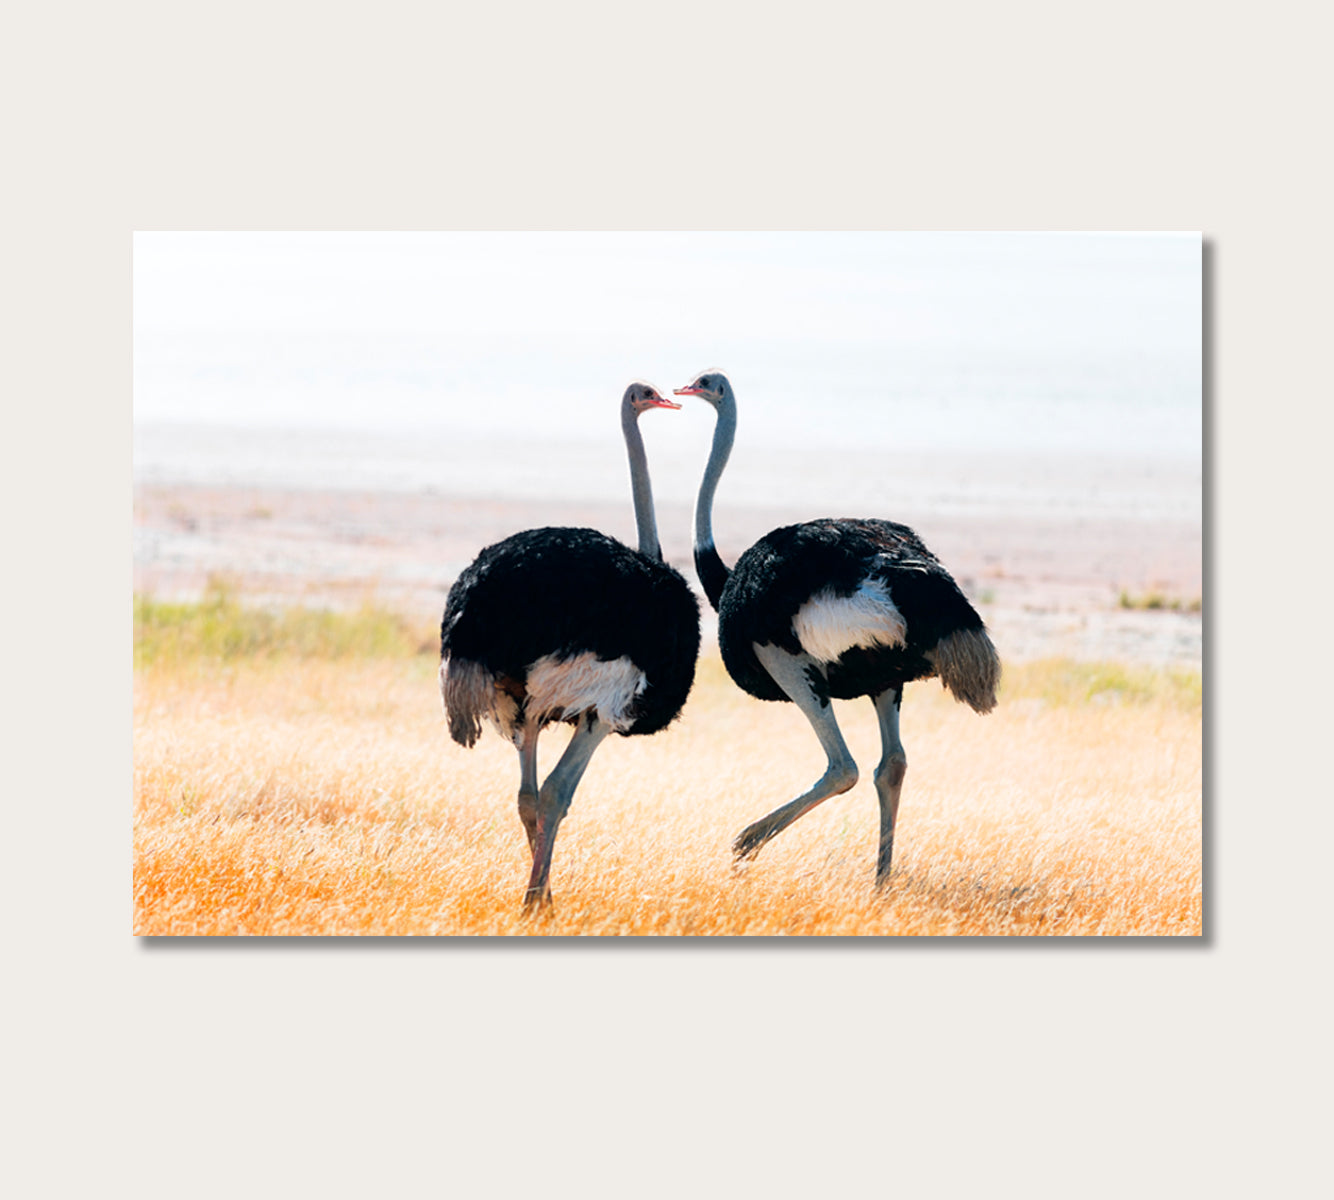 Ostriches Couple in Etosha National Park Namibia Africa Canvas Print-Canvas Print-CetArt-1 Panel-24x16 inches-CetArt